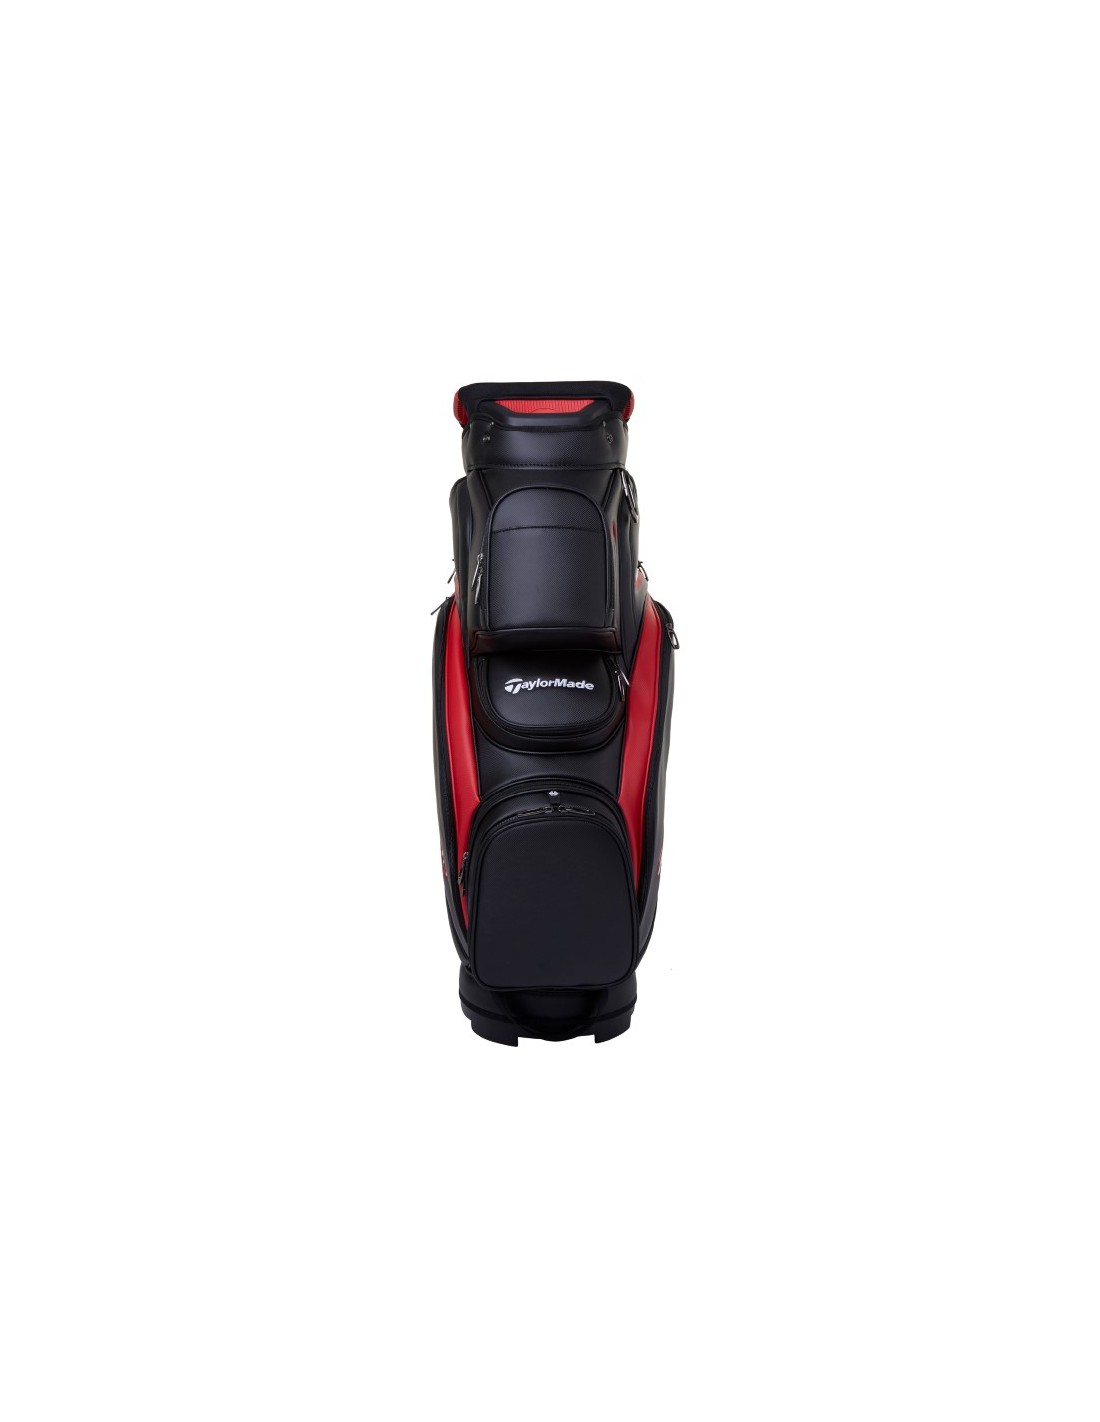 Taylormade Deluxe Golf Cart Bag 2023 - Black/Red